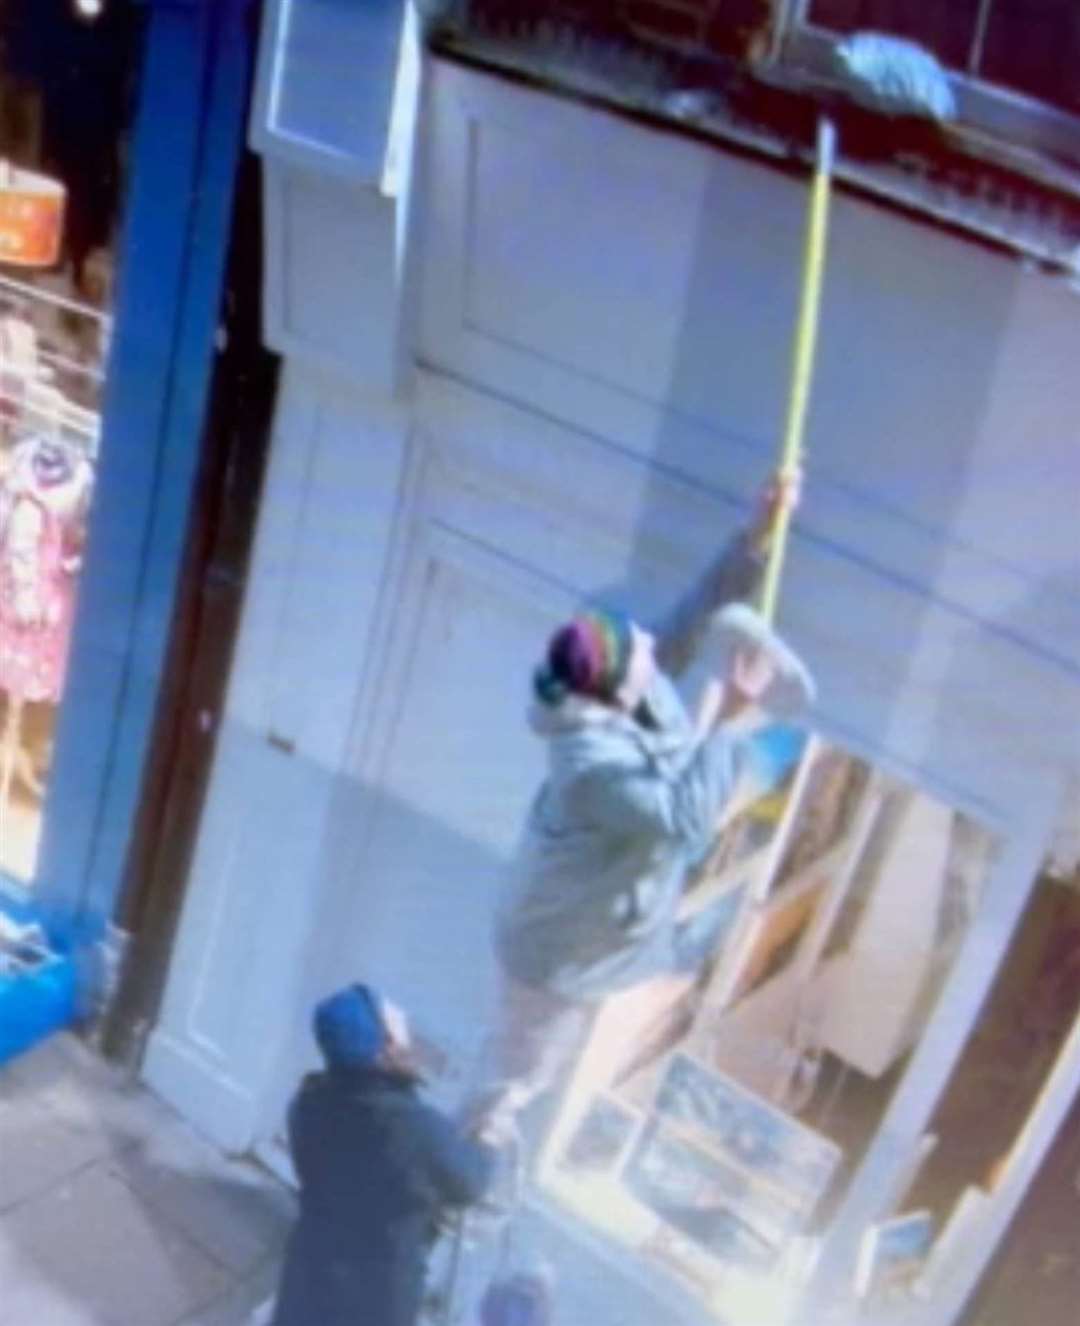 A group had to use a ladder and broom to retrieve the parcel